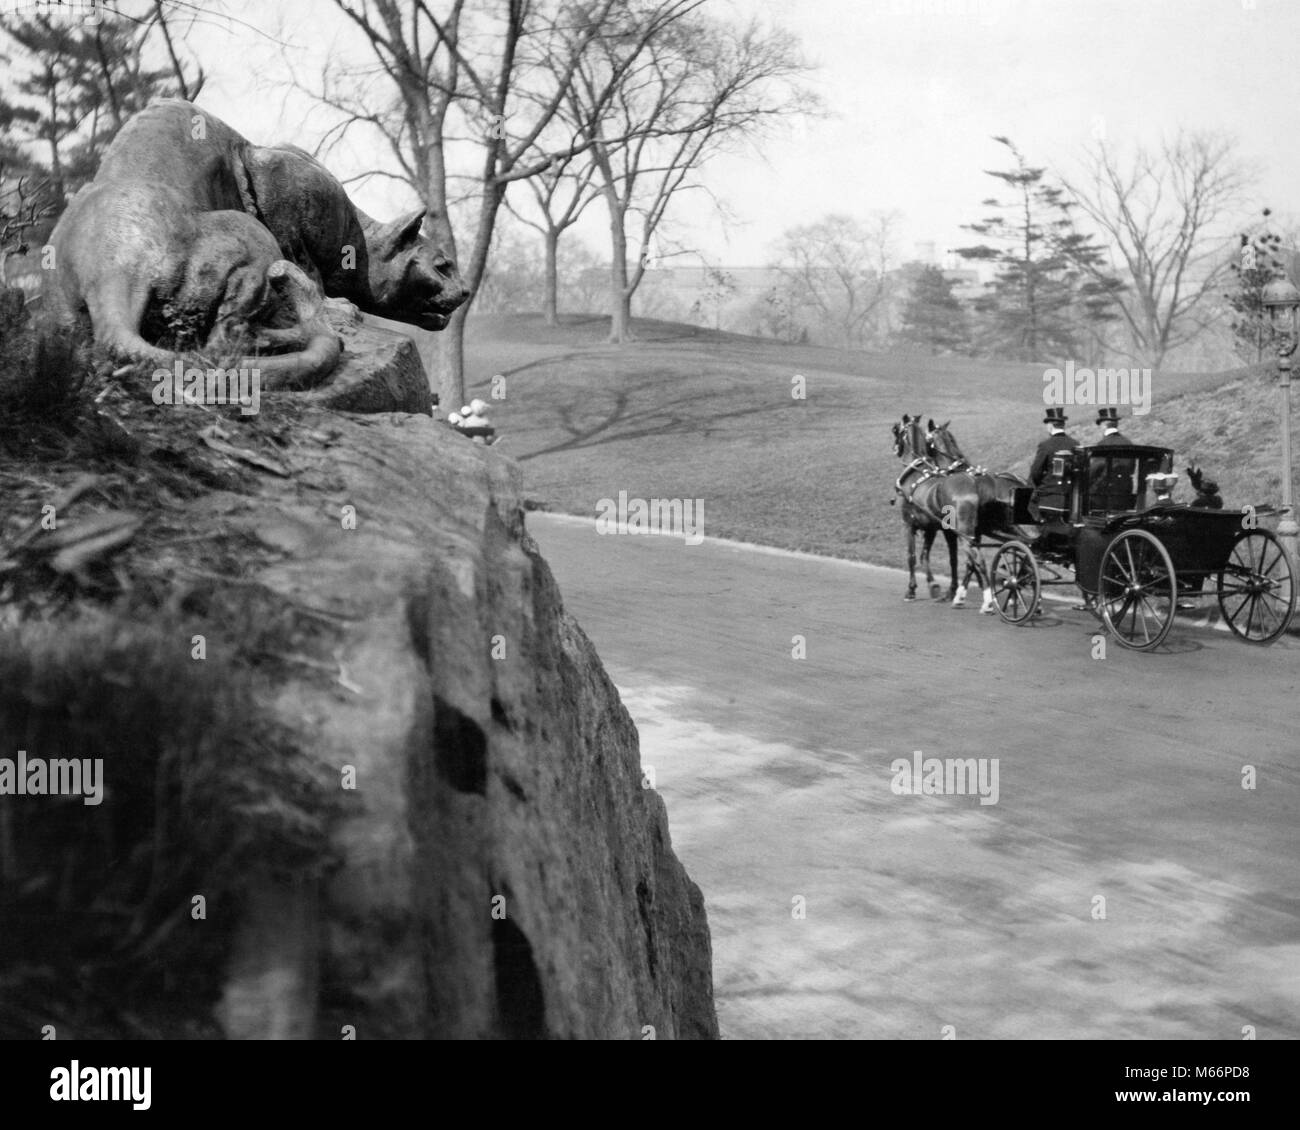 1880s 1890s HORSE CARRIAGE PASSING THE STILL HUNT PANTHER SCULPTURE BY EDWARD KEMEYS EAST DRIVE CENTRAL PARK MANHATTAN NYC USA - q74789 CPC001 HARS NYC THREE ANIMALS CREATIVITY NEW YORK 1880s CITIES IMAGINATION WAGONS NEW YORK CITY SMALL GROUP OF PEOPLE WILDLIFE 1883 ANIMALIER. B&W BIG APPLE BLACK AND WHITE BOULDER CARRIAGES EAST DRIVE EAST SIDE EDWARD FOOTMAN KEMEYS OLD FASHIONED PANTHER STILL HUNT TWO WOMEN Stock Photo